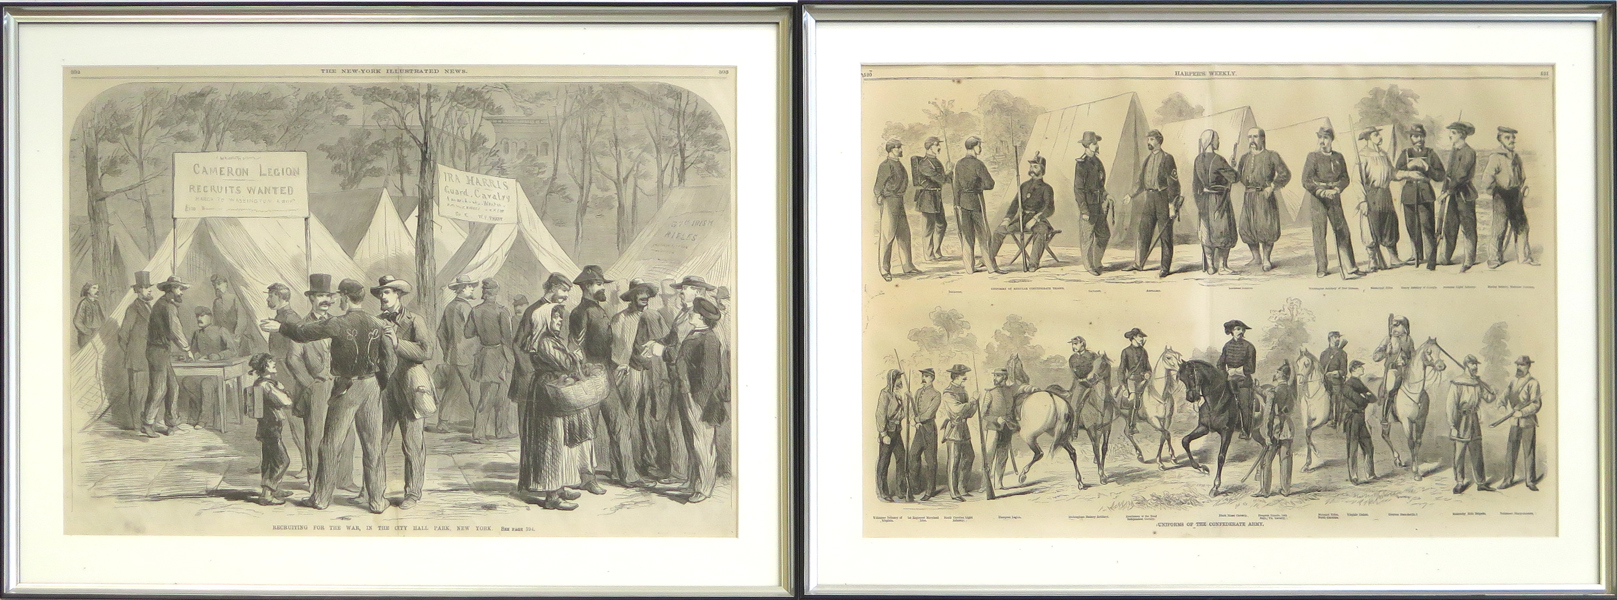 Litografier, 2 st: Amerikanska Inbördeskriget; "Uniforms of the Confederate Army" ur  "Harper's weekly" 17/8 1861 samt "Recruiting for the war, in the City Hall Park, New York" _26652a_8db215850bd32b1_lg.jpeg